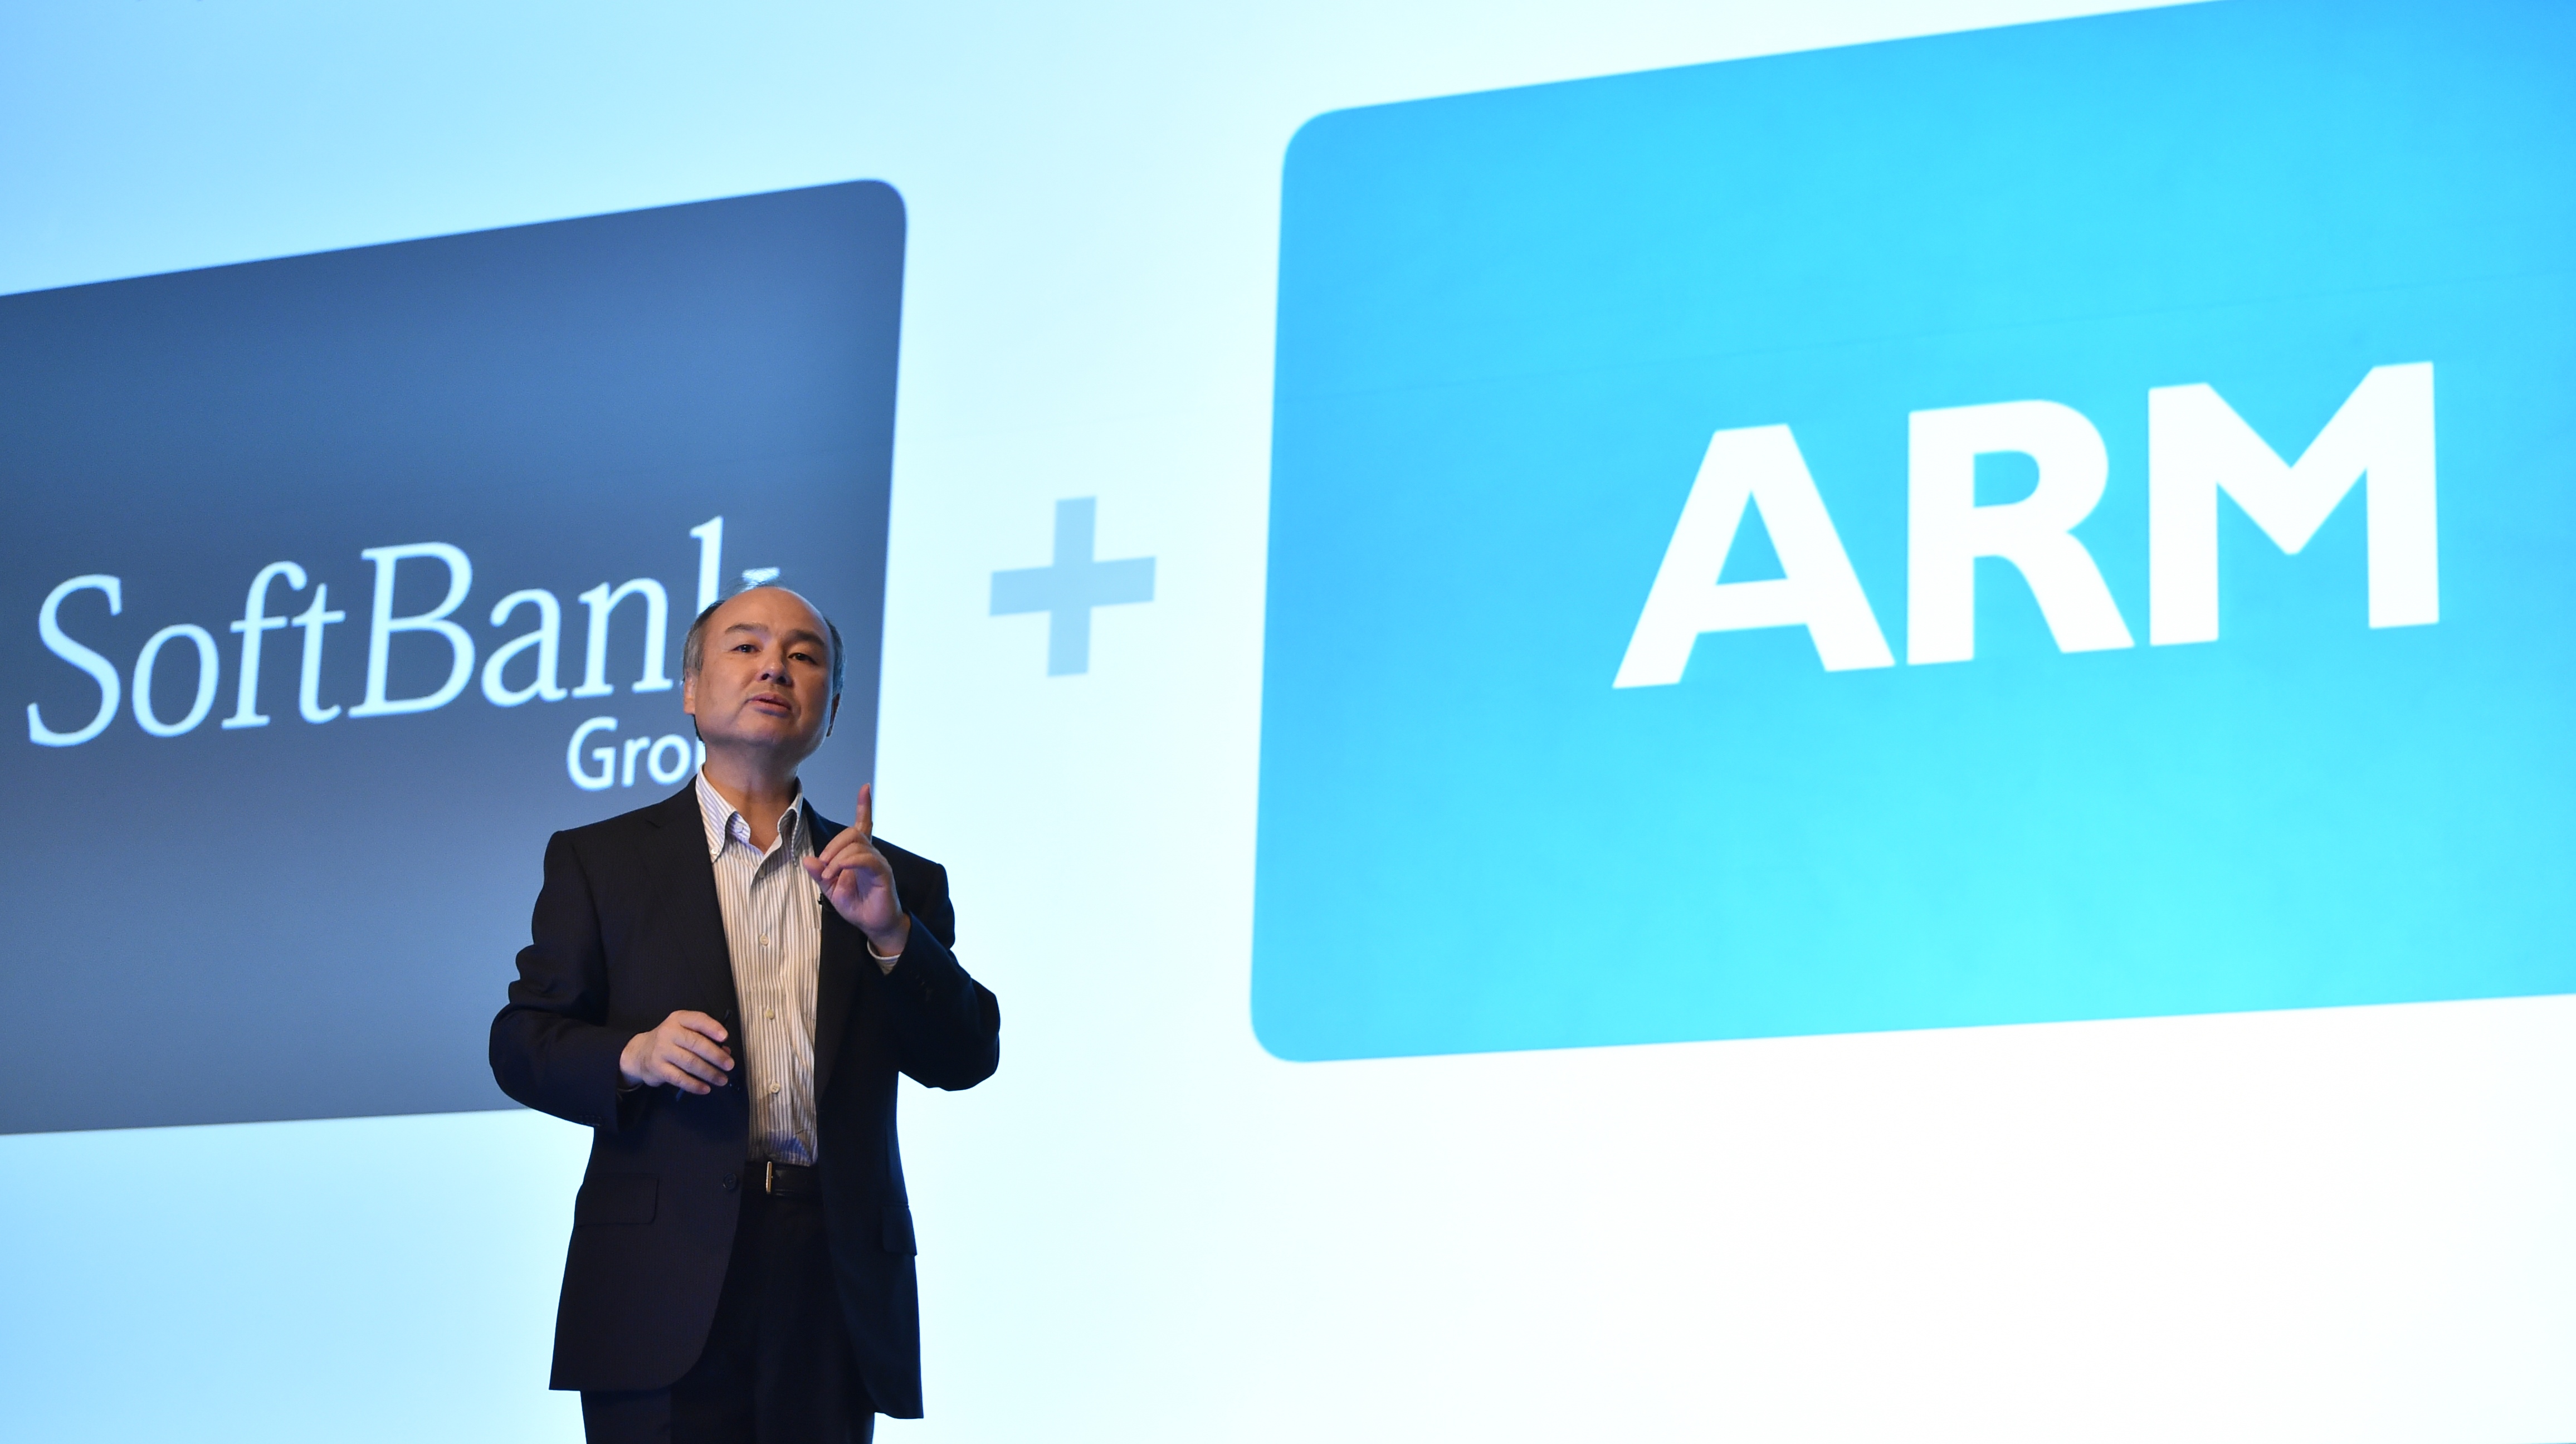 Intel joins Apple, Alphabet and Samsung as an Arm investor